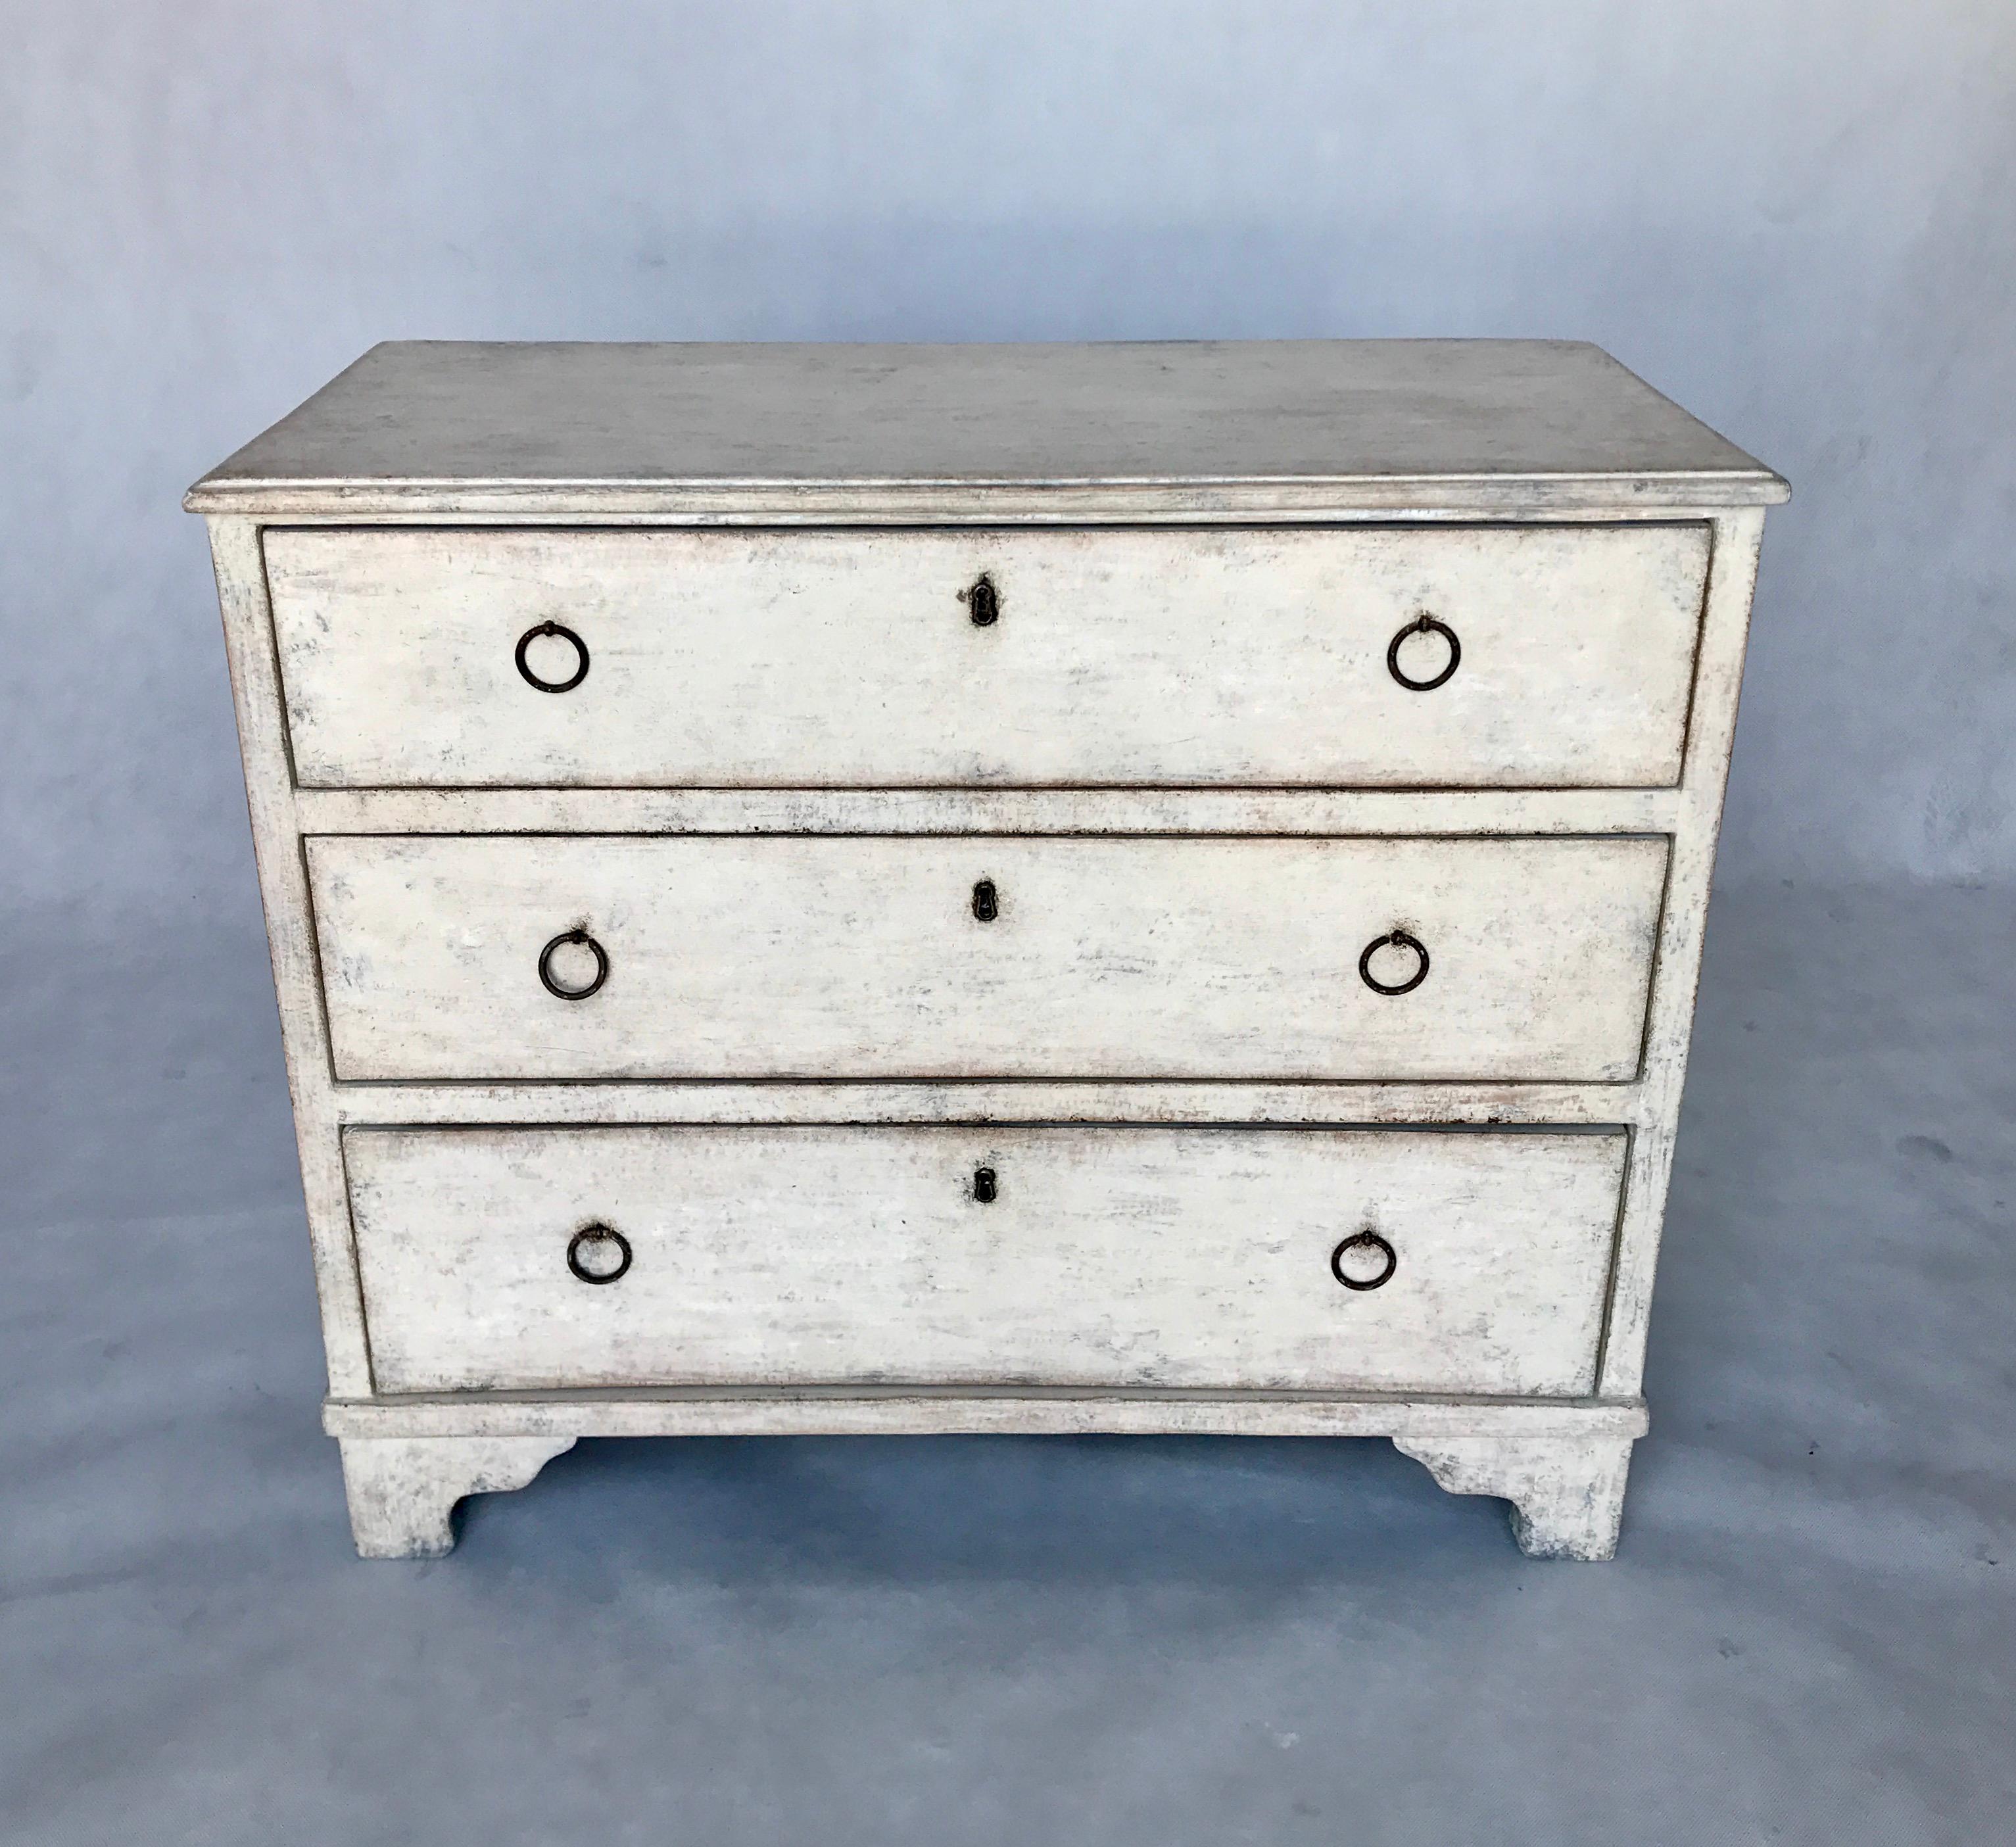 Swedish chest with three-drawers in color antique white and beige. This chest is elegant and timeless. This furniture has original hardware’s and locks.